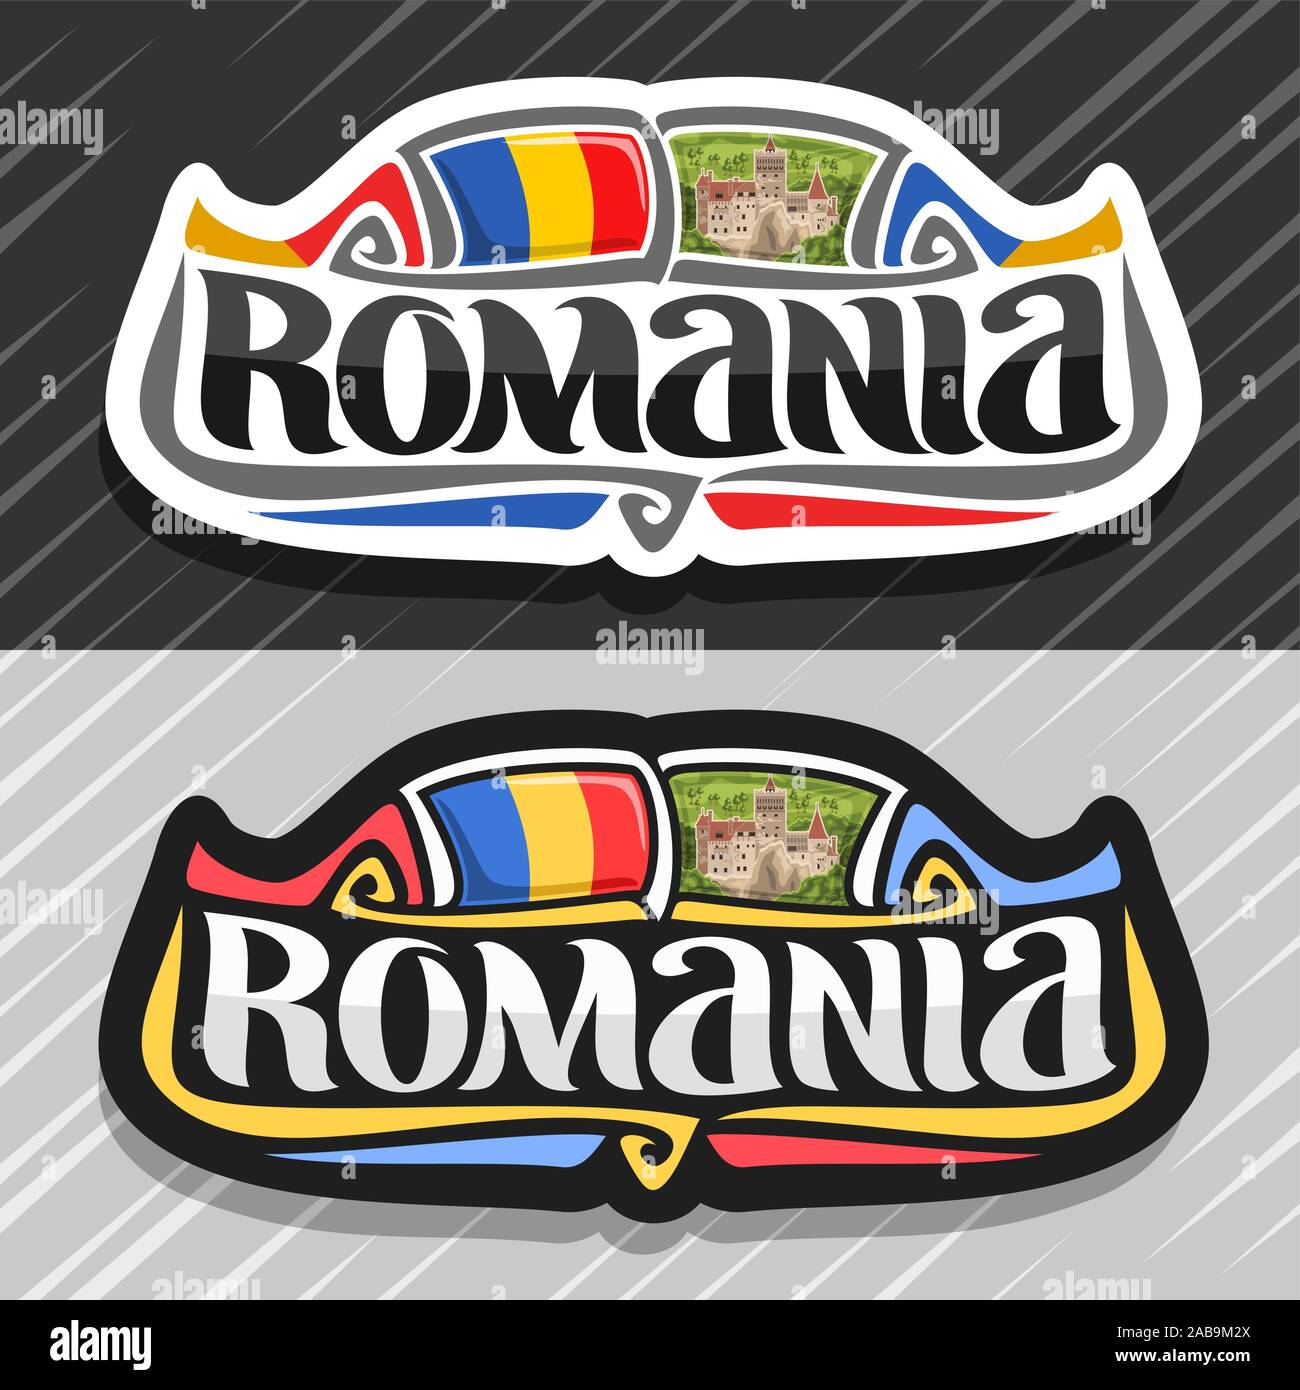 Vector logo for Romania country, fridge magnet with romanian state flag, original brush typeface for word romania and national romanian symbol - Bran Stock Vector